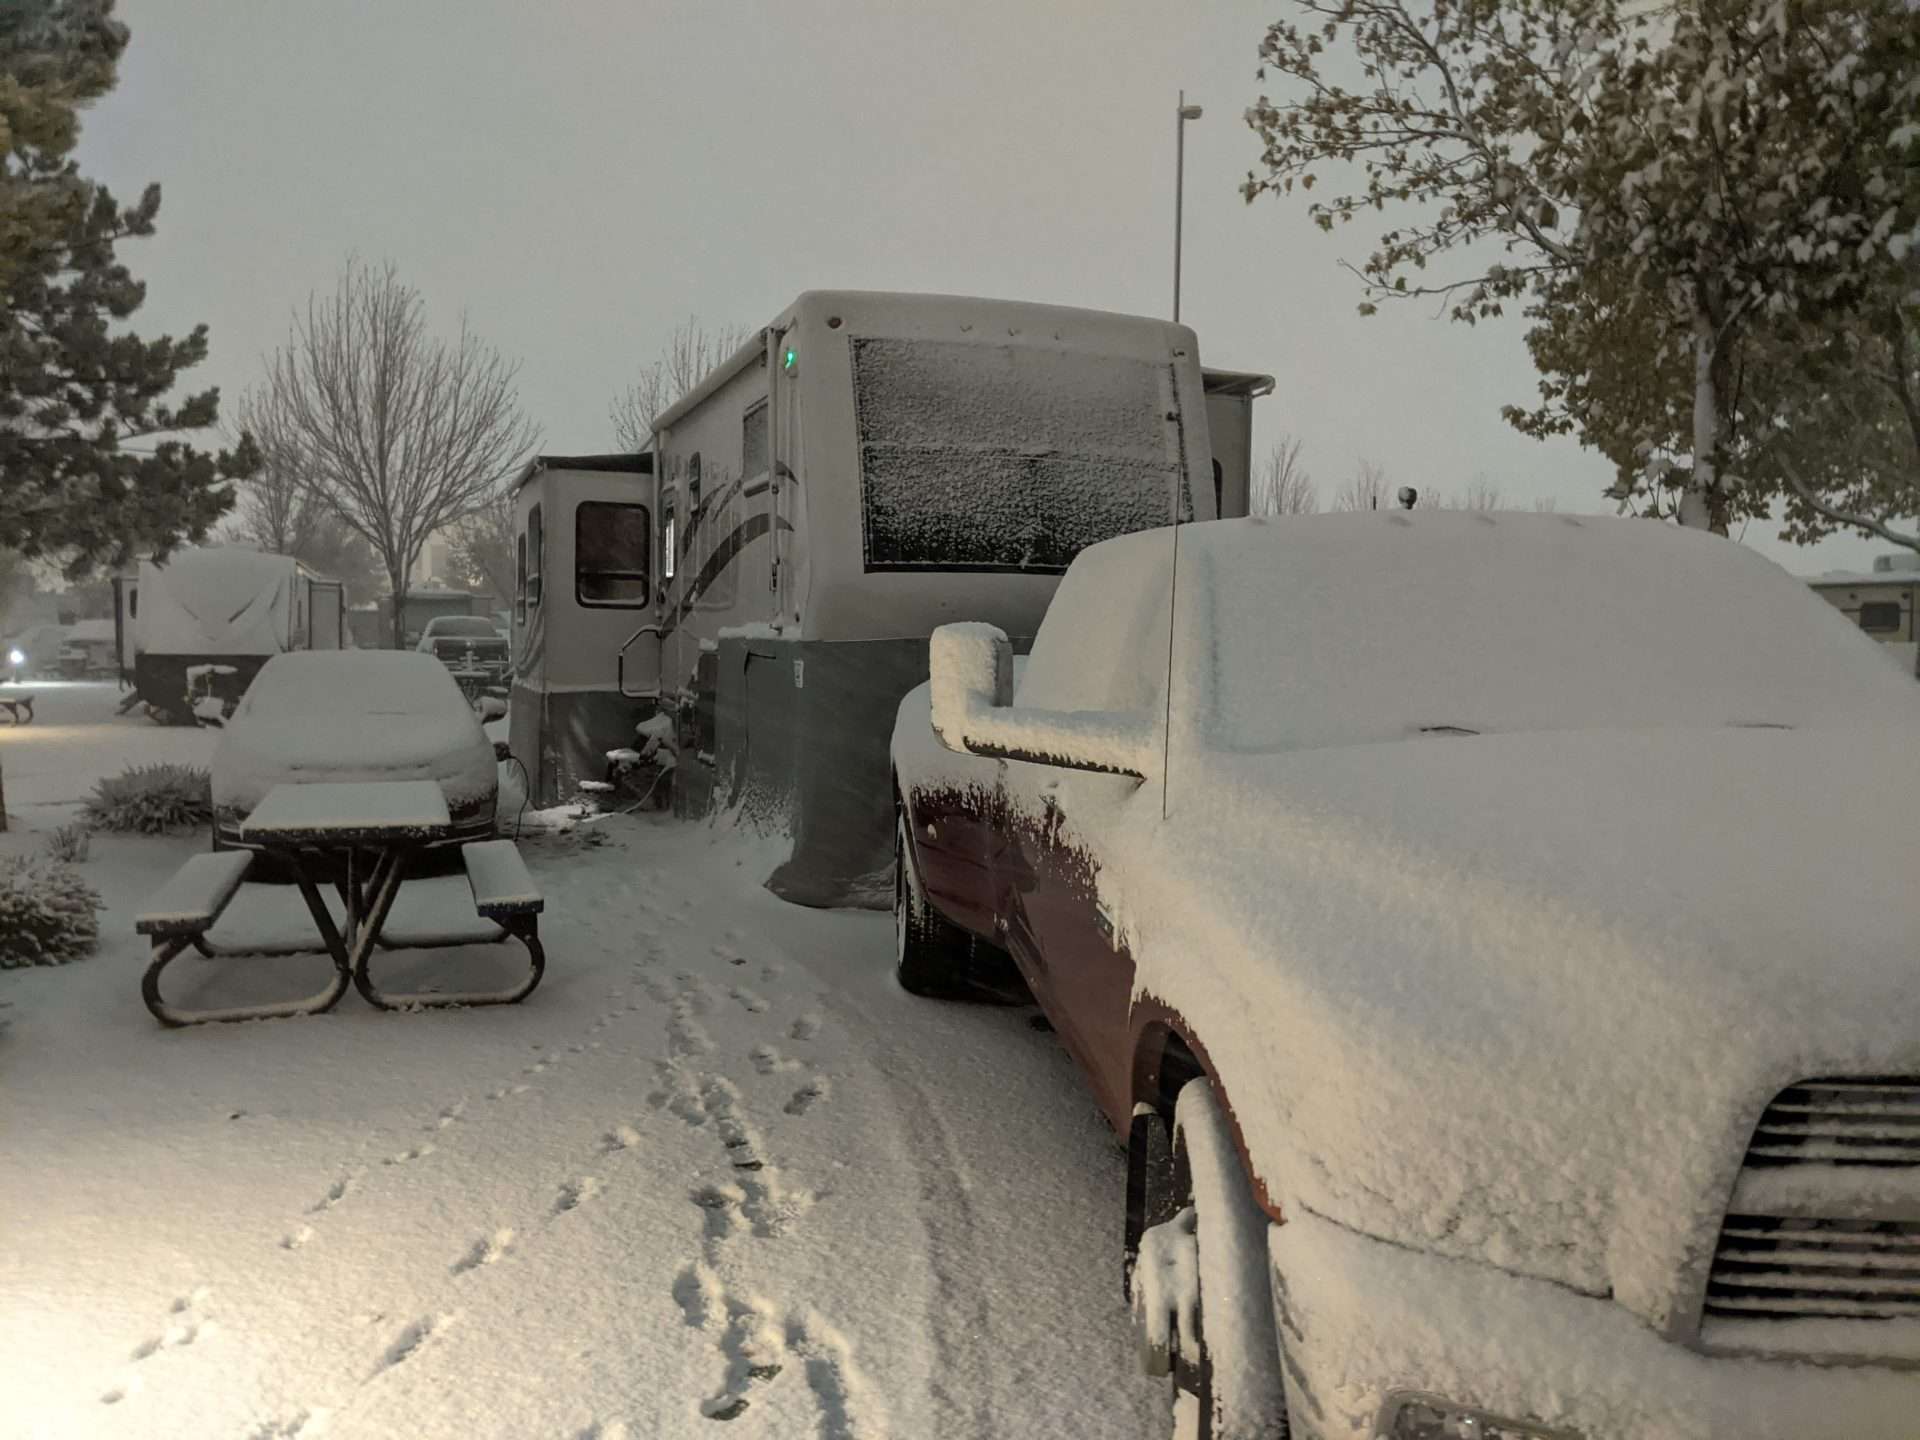 Class C motorhome parked in snow with just a snow skirt on